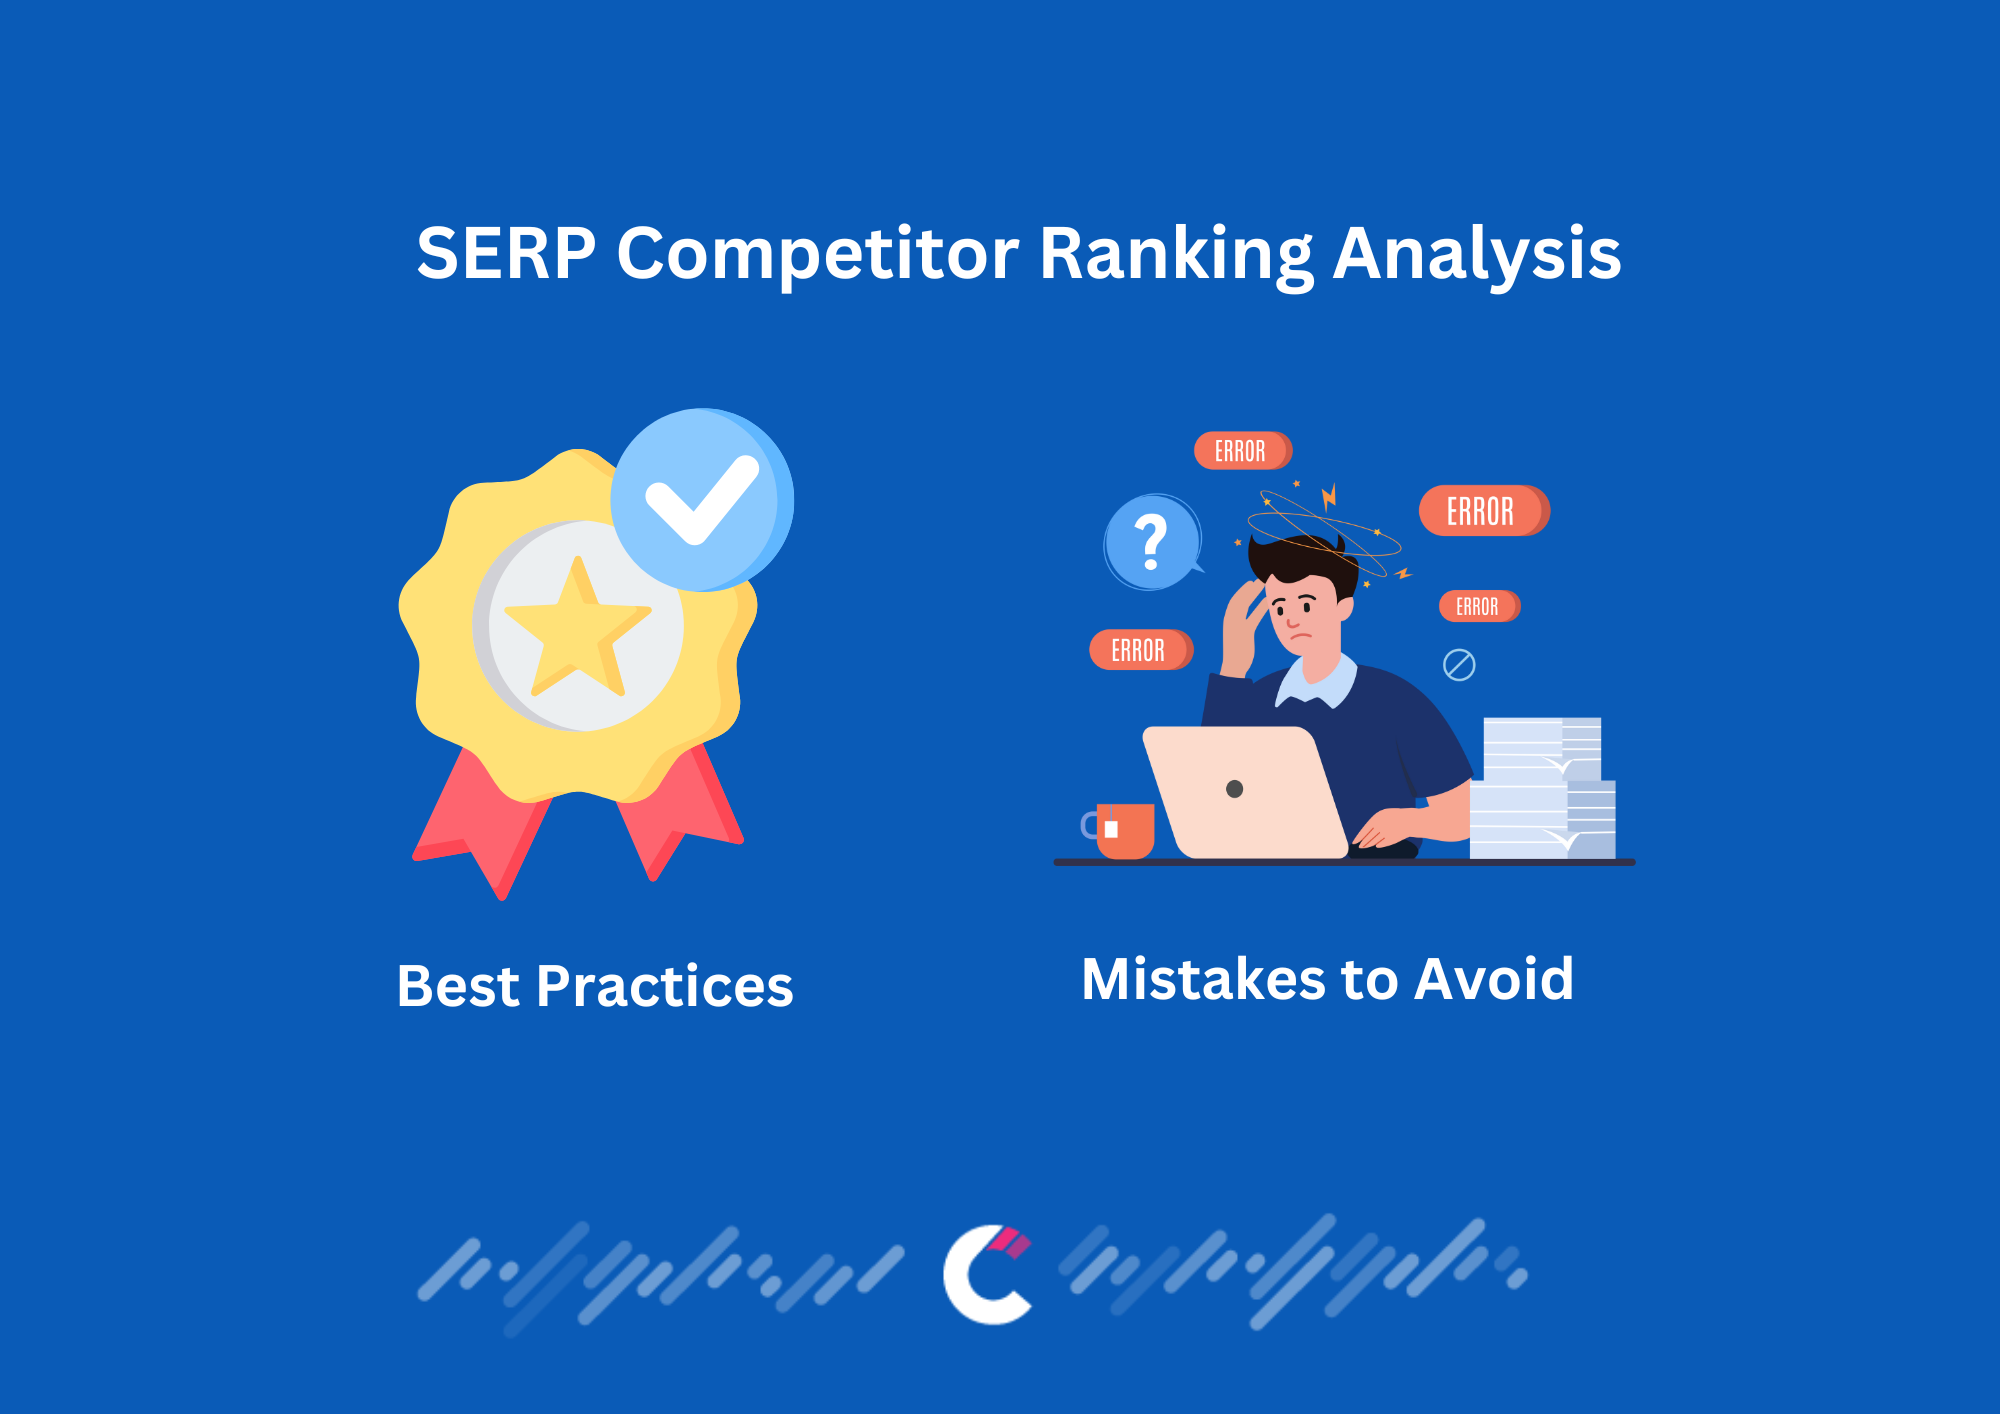 SERP Competitor Ranking Analysis best practices and mistakes to avoid